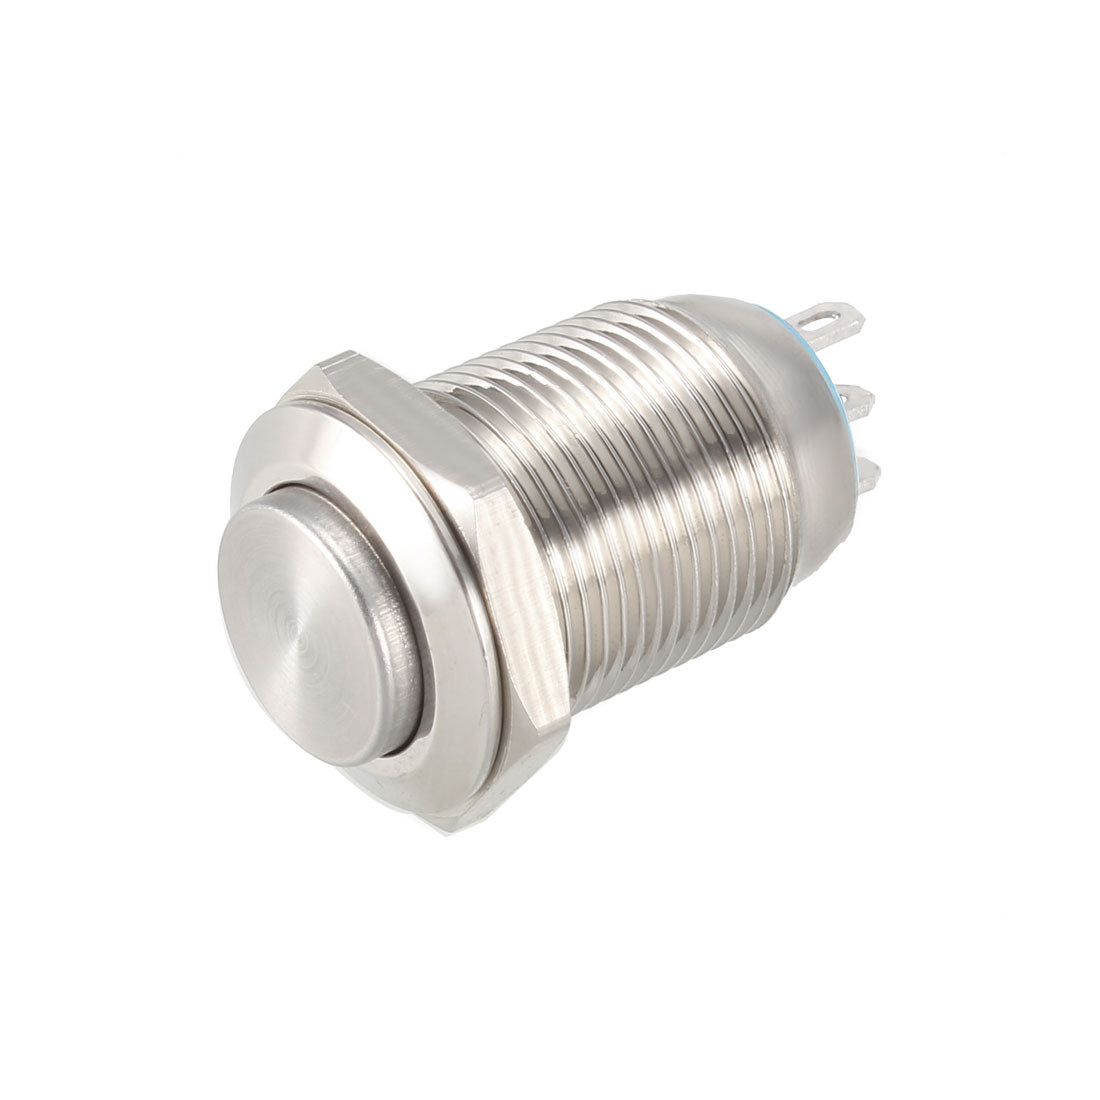 uxcell Uxcell Momentary Metal Push Button Switch 12mm Mounting Dia 1NO 1NC COM DC 30V 0.1A 23.5 x 16mm